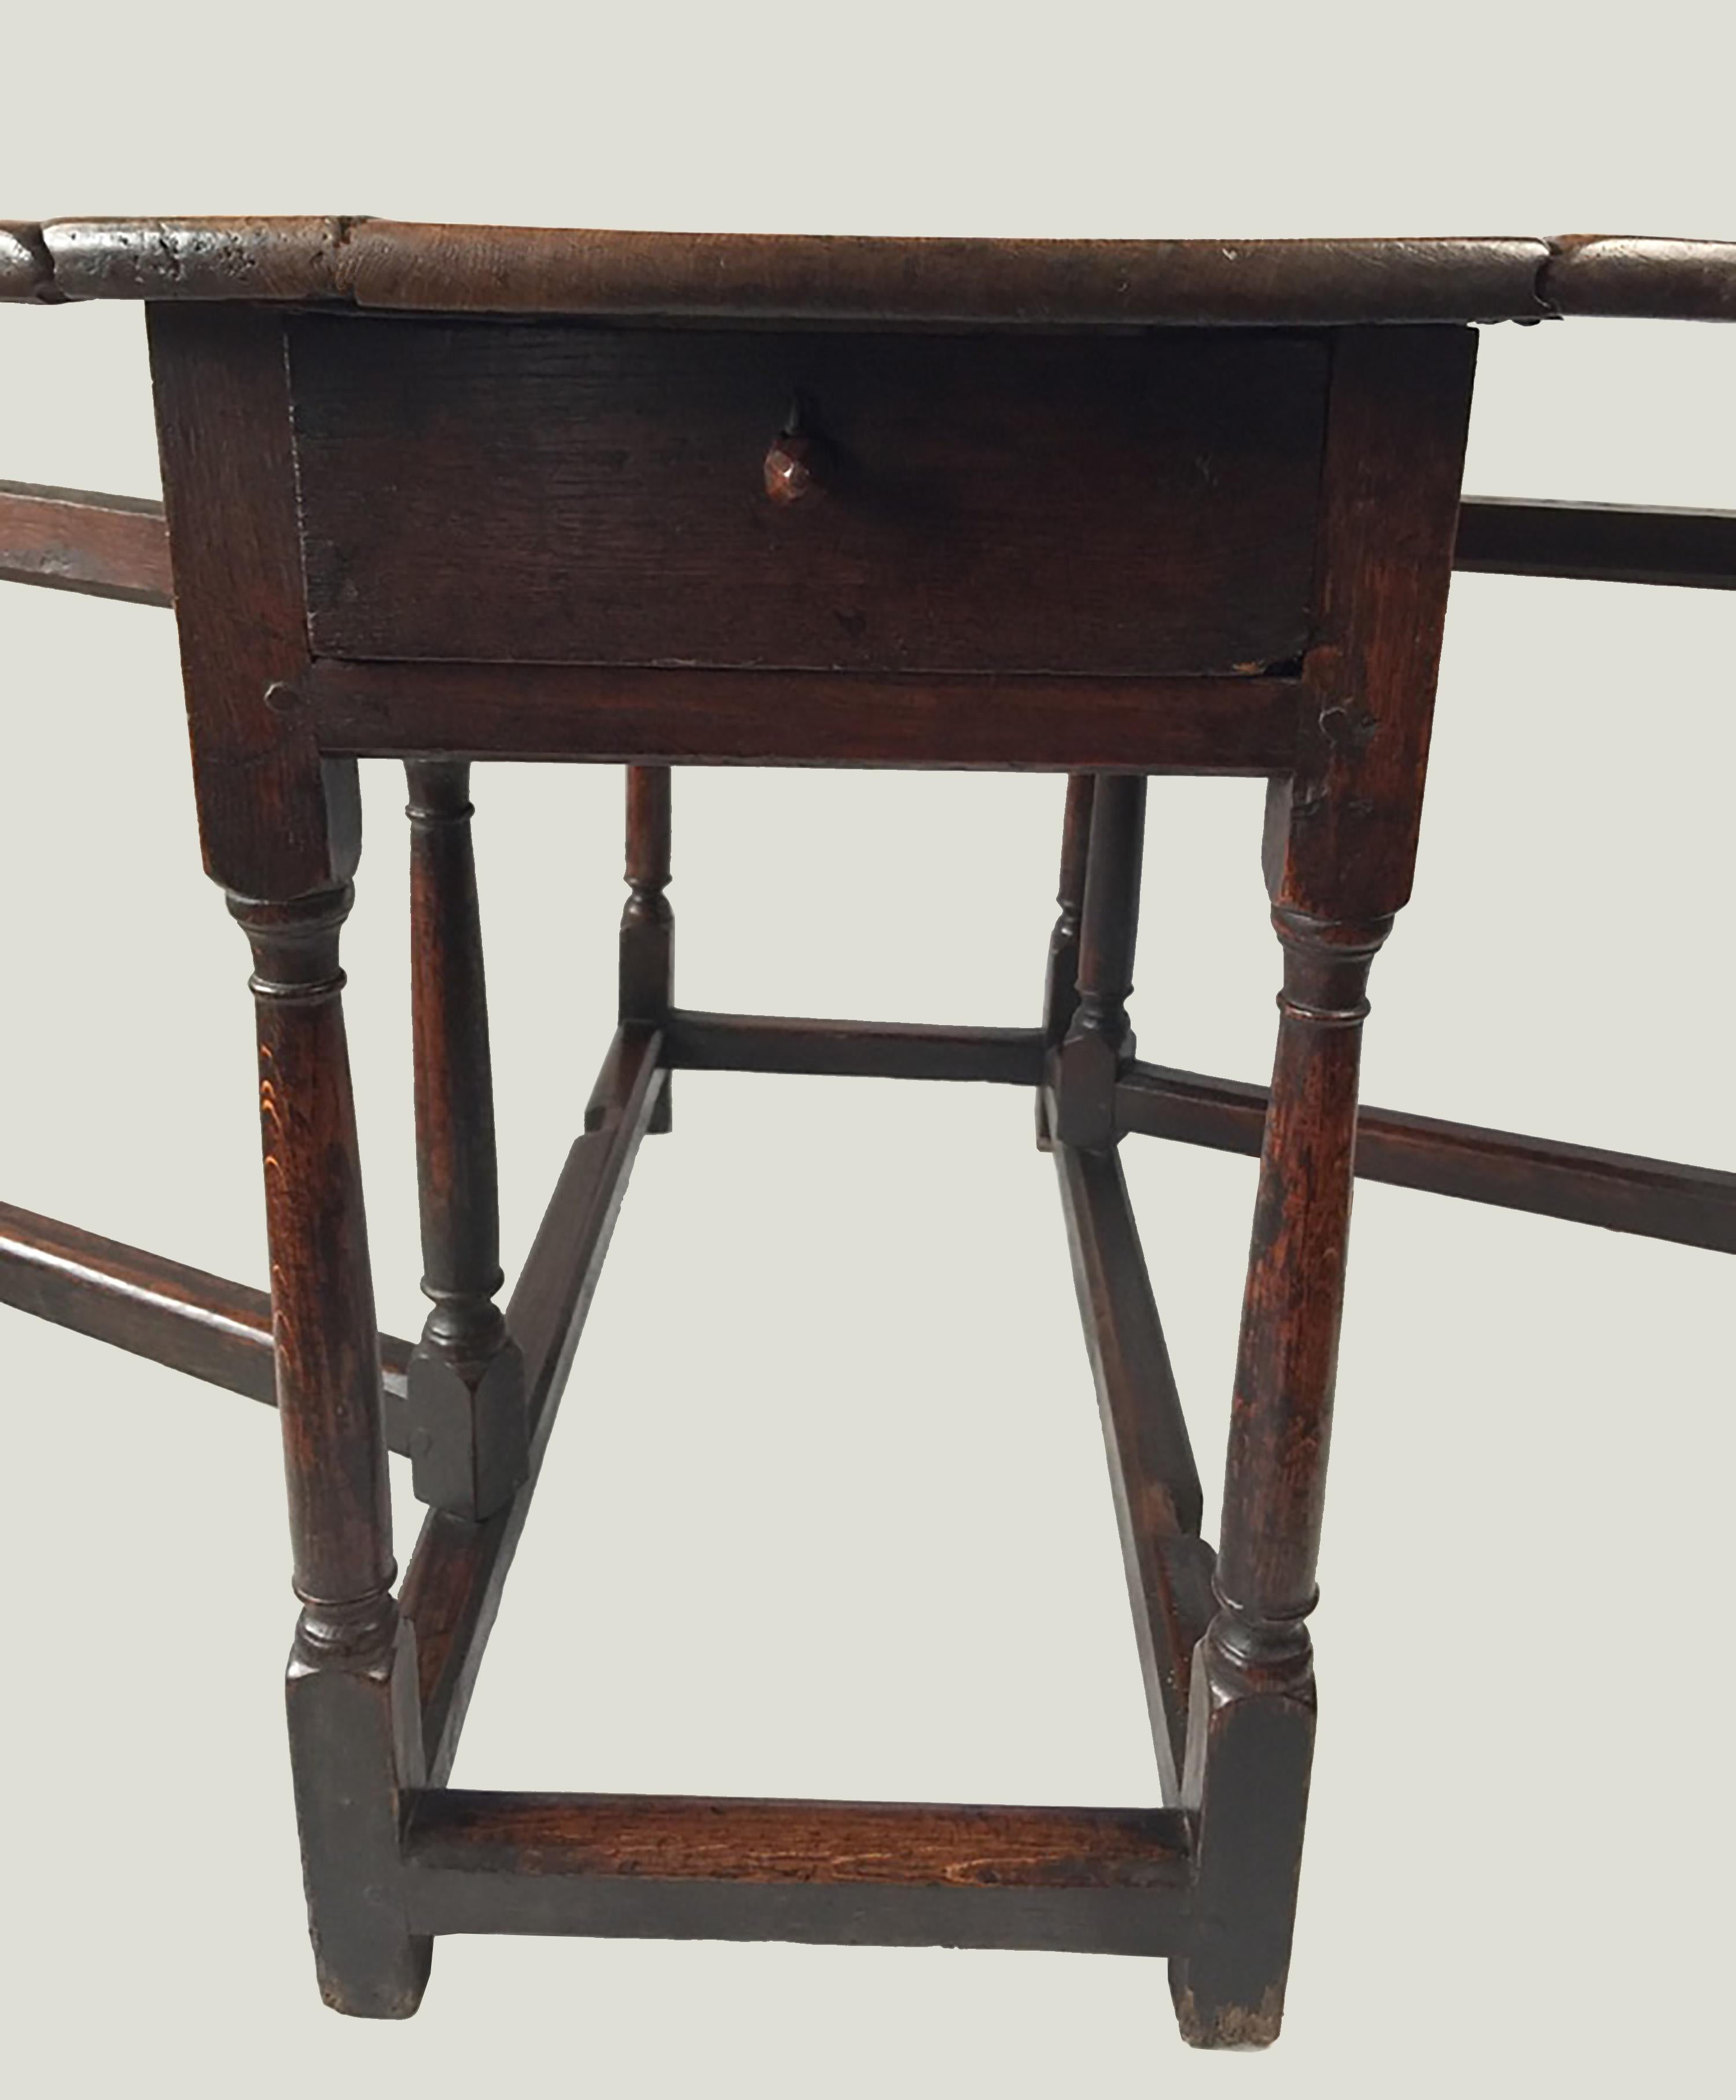 Very early 18th-late 17th century oak gate leg table, in good condition for its age. Well cared with a good patina. Really lovely carved drawer knob.